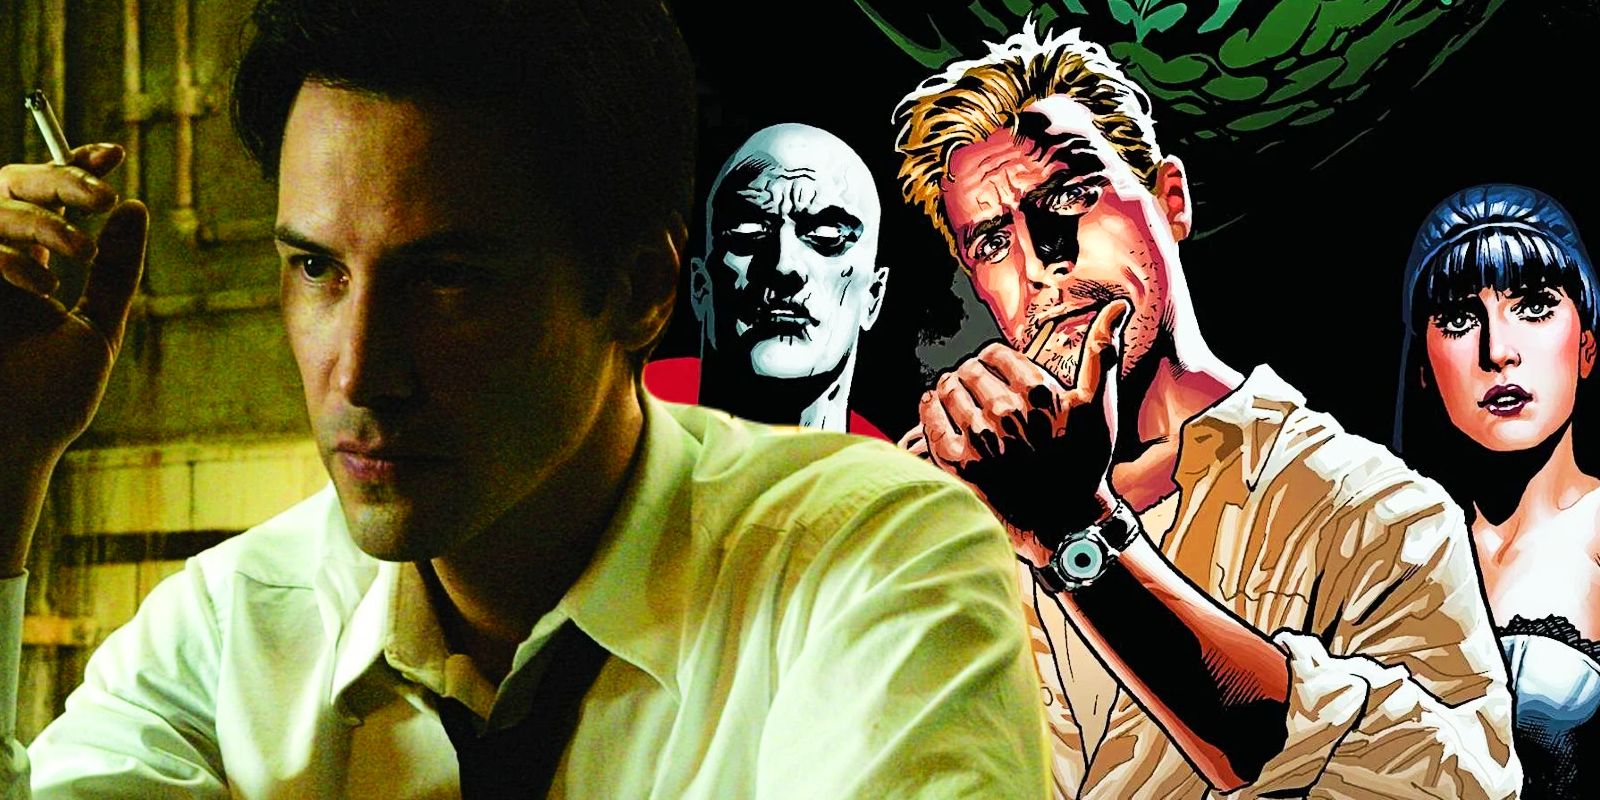 Keanu Reeves as Constantine and the Justice League Dark comics